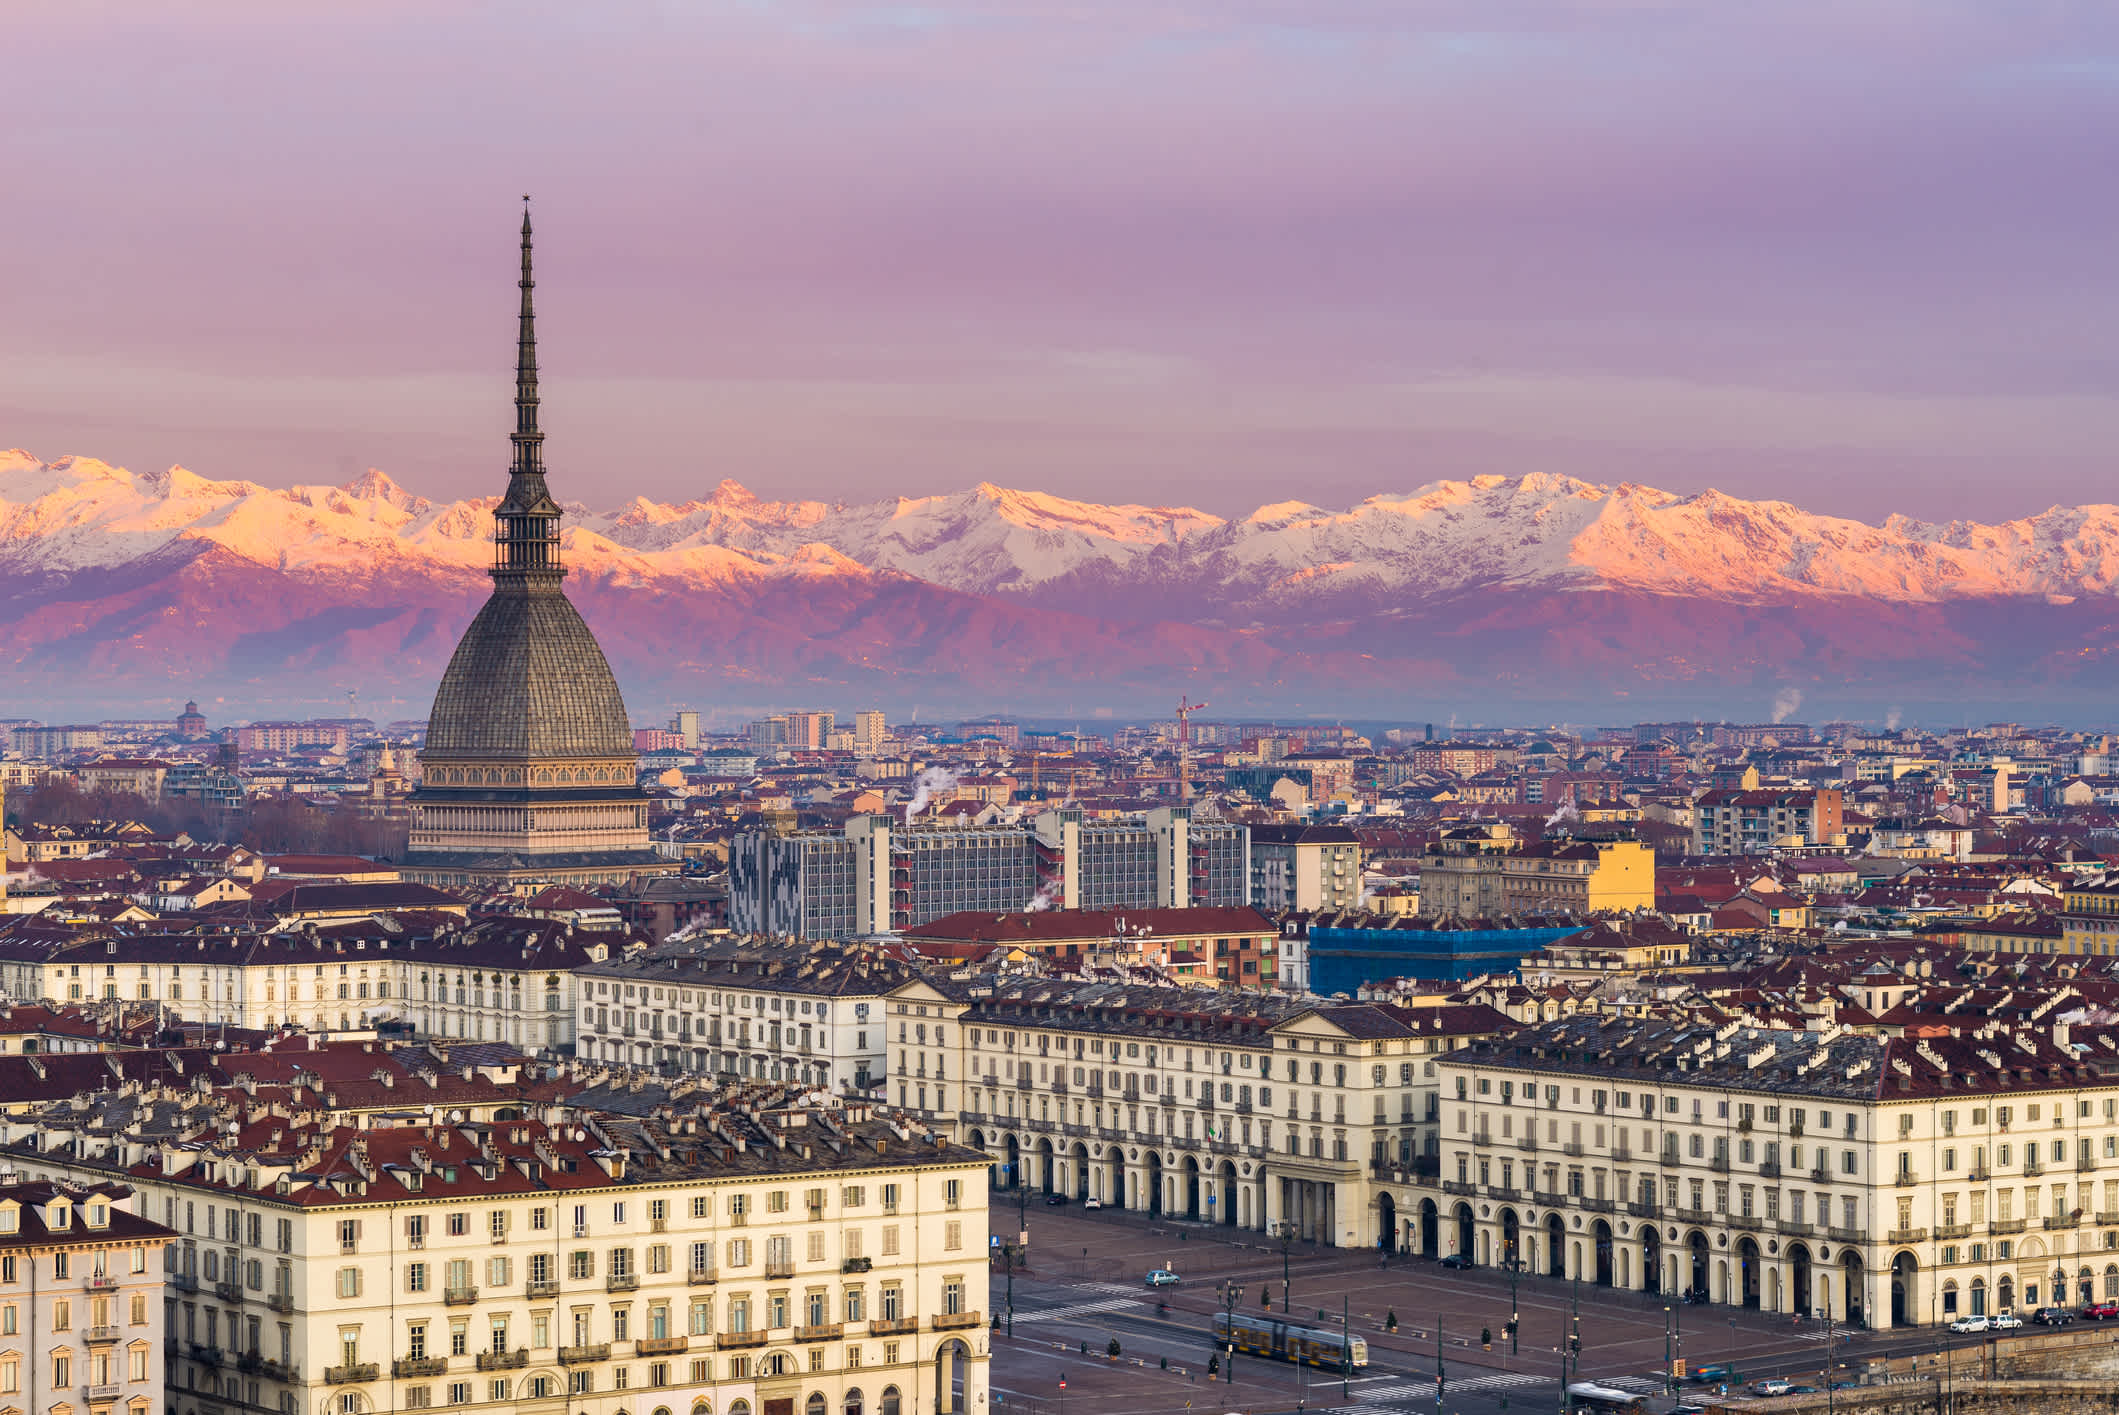 View of the panorama of the city and mountains - to be experienced on a Turin holiday